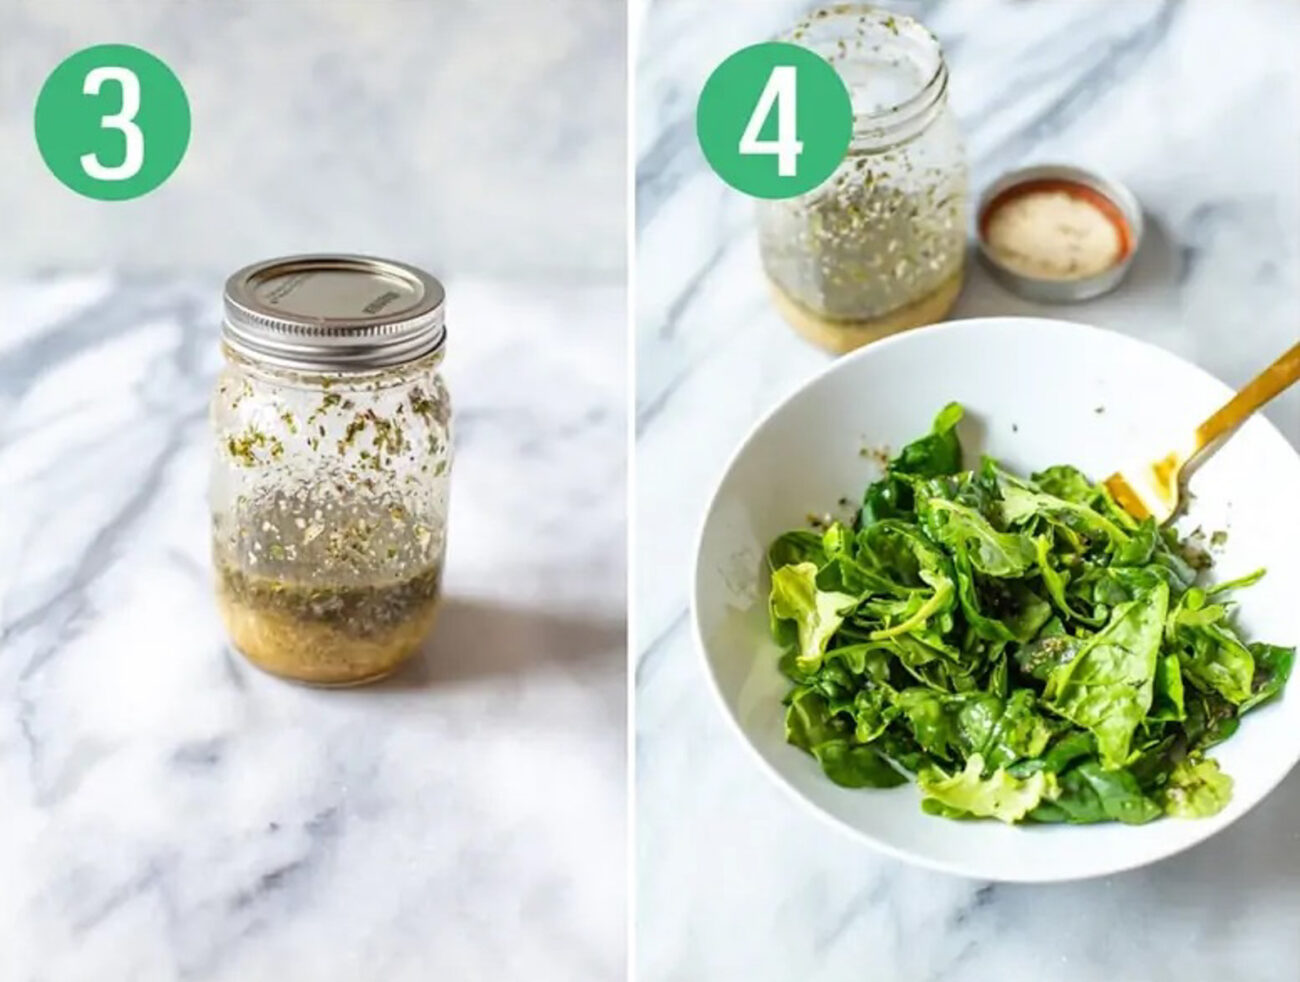 Steps 3 and 4 for making homemade salad dressings: Shake everything then pour onto salad.